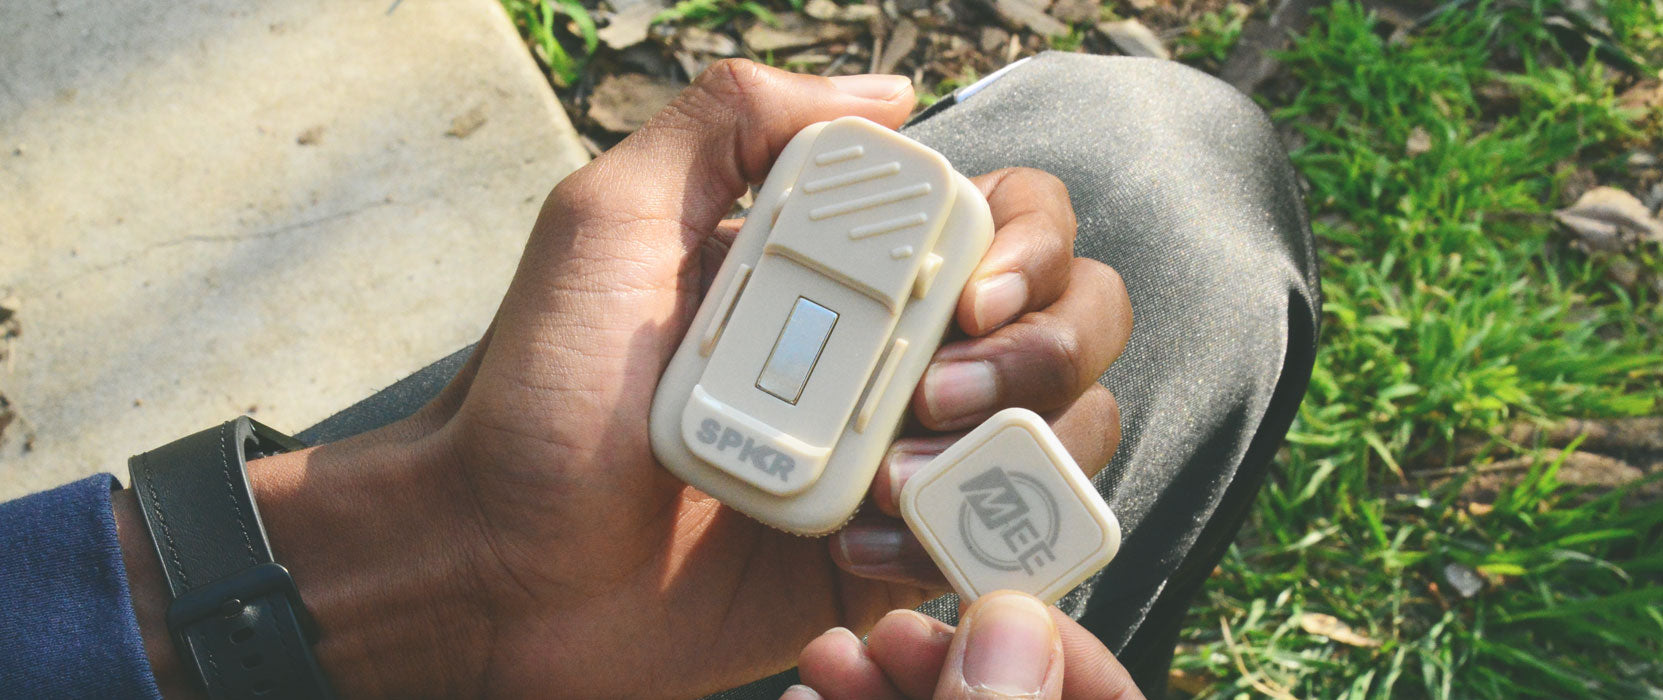 A person holding two hearing aids in their hands outdoors, with focus on the devices. one is labeled 'spk' and the other 'mic'.